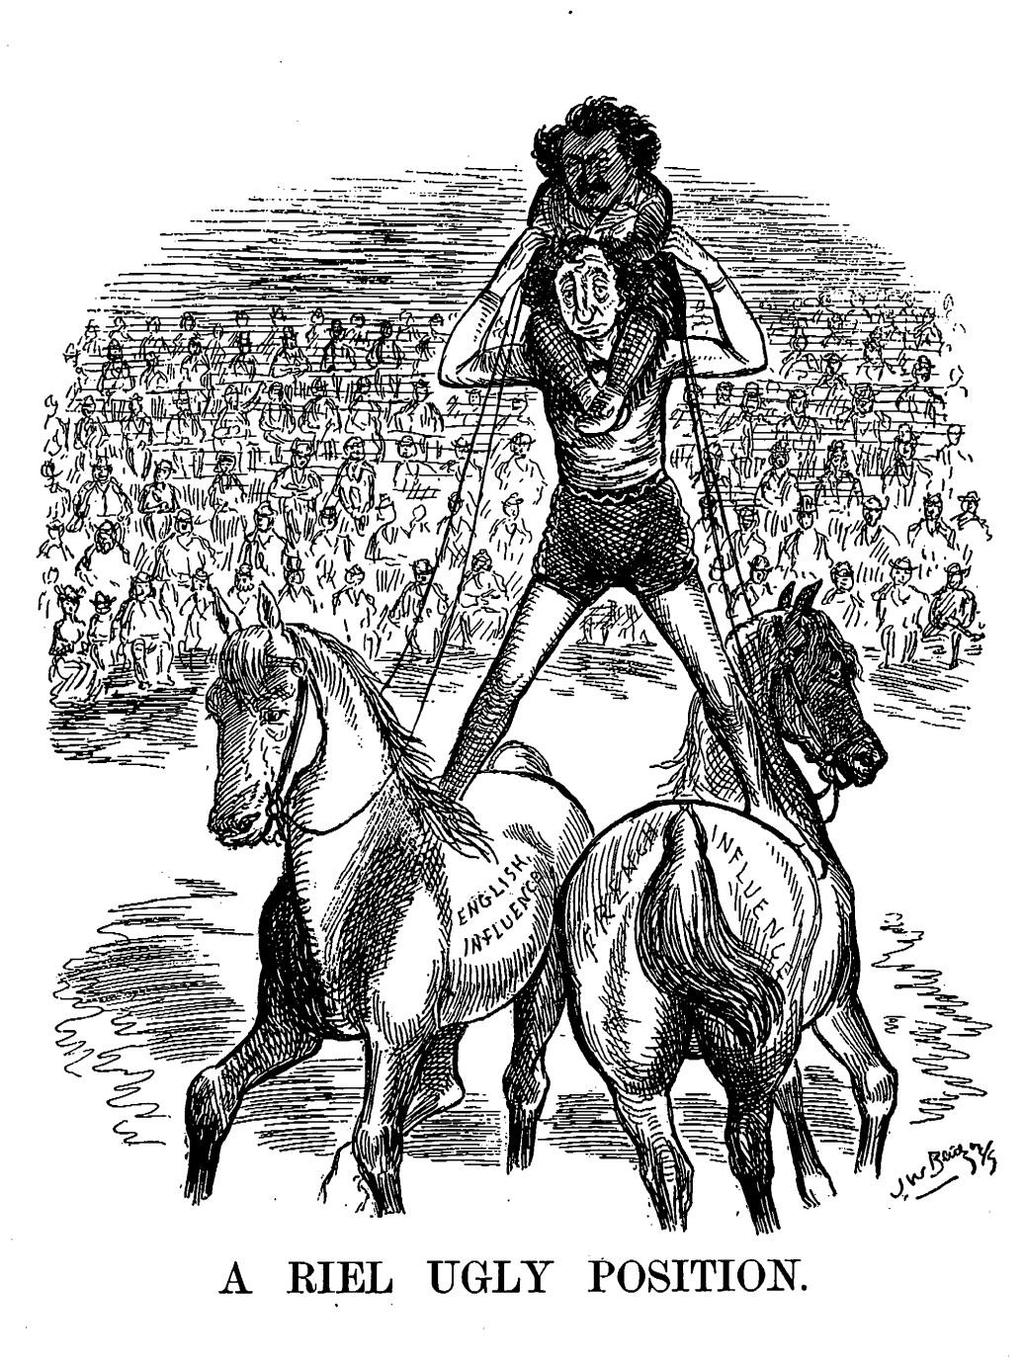 Political Consequences of the Métis Uprisings Political cartoon showing the struggle of Macdonald to keep both Francophones and Anglophones happy during the